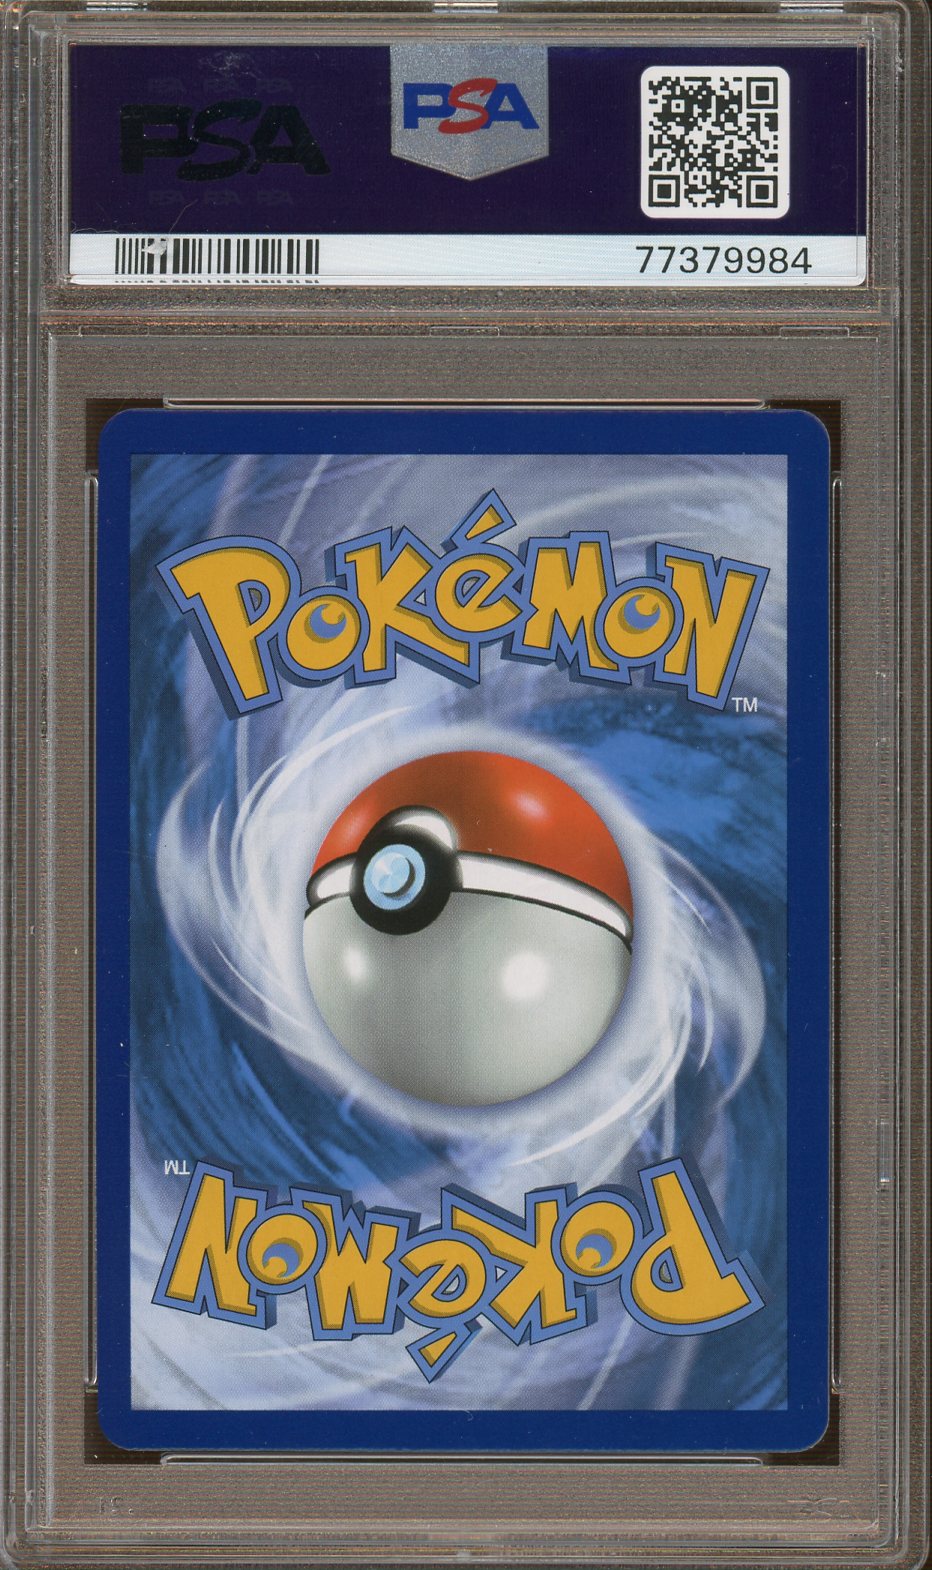 PSA 8 - 2022 - Pokemon - Astral Radiance - Piers (Trainer Gallery)